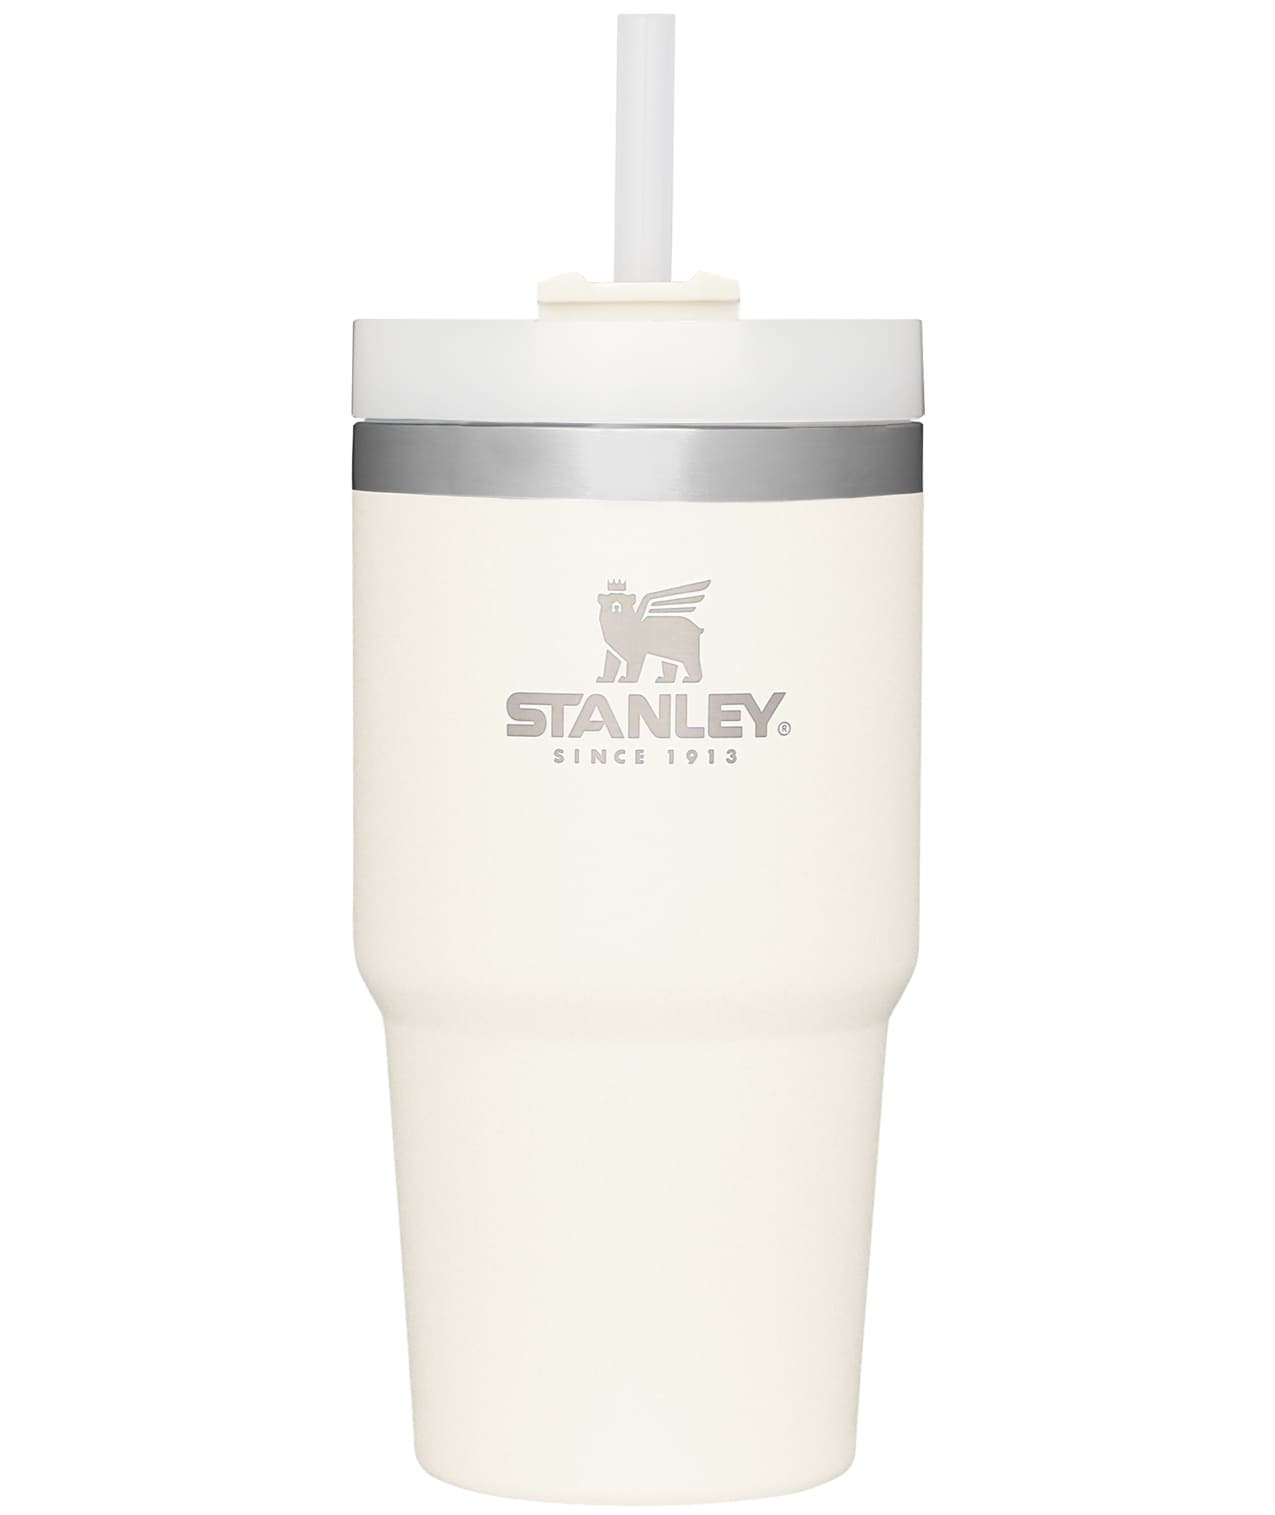 STANLEY The Quencher H2.0 FlowState Tumbler Stormy Sea Soft Matte 40 OZ Cup  Navy